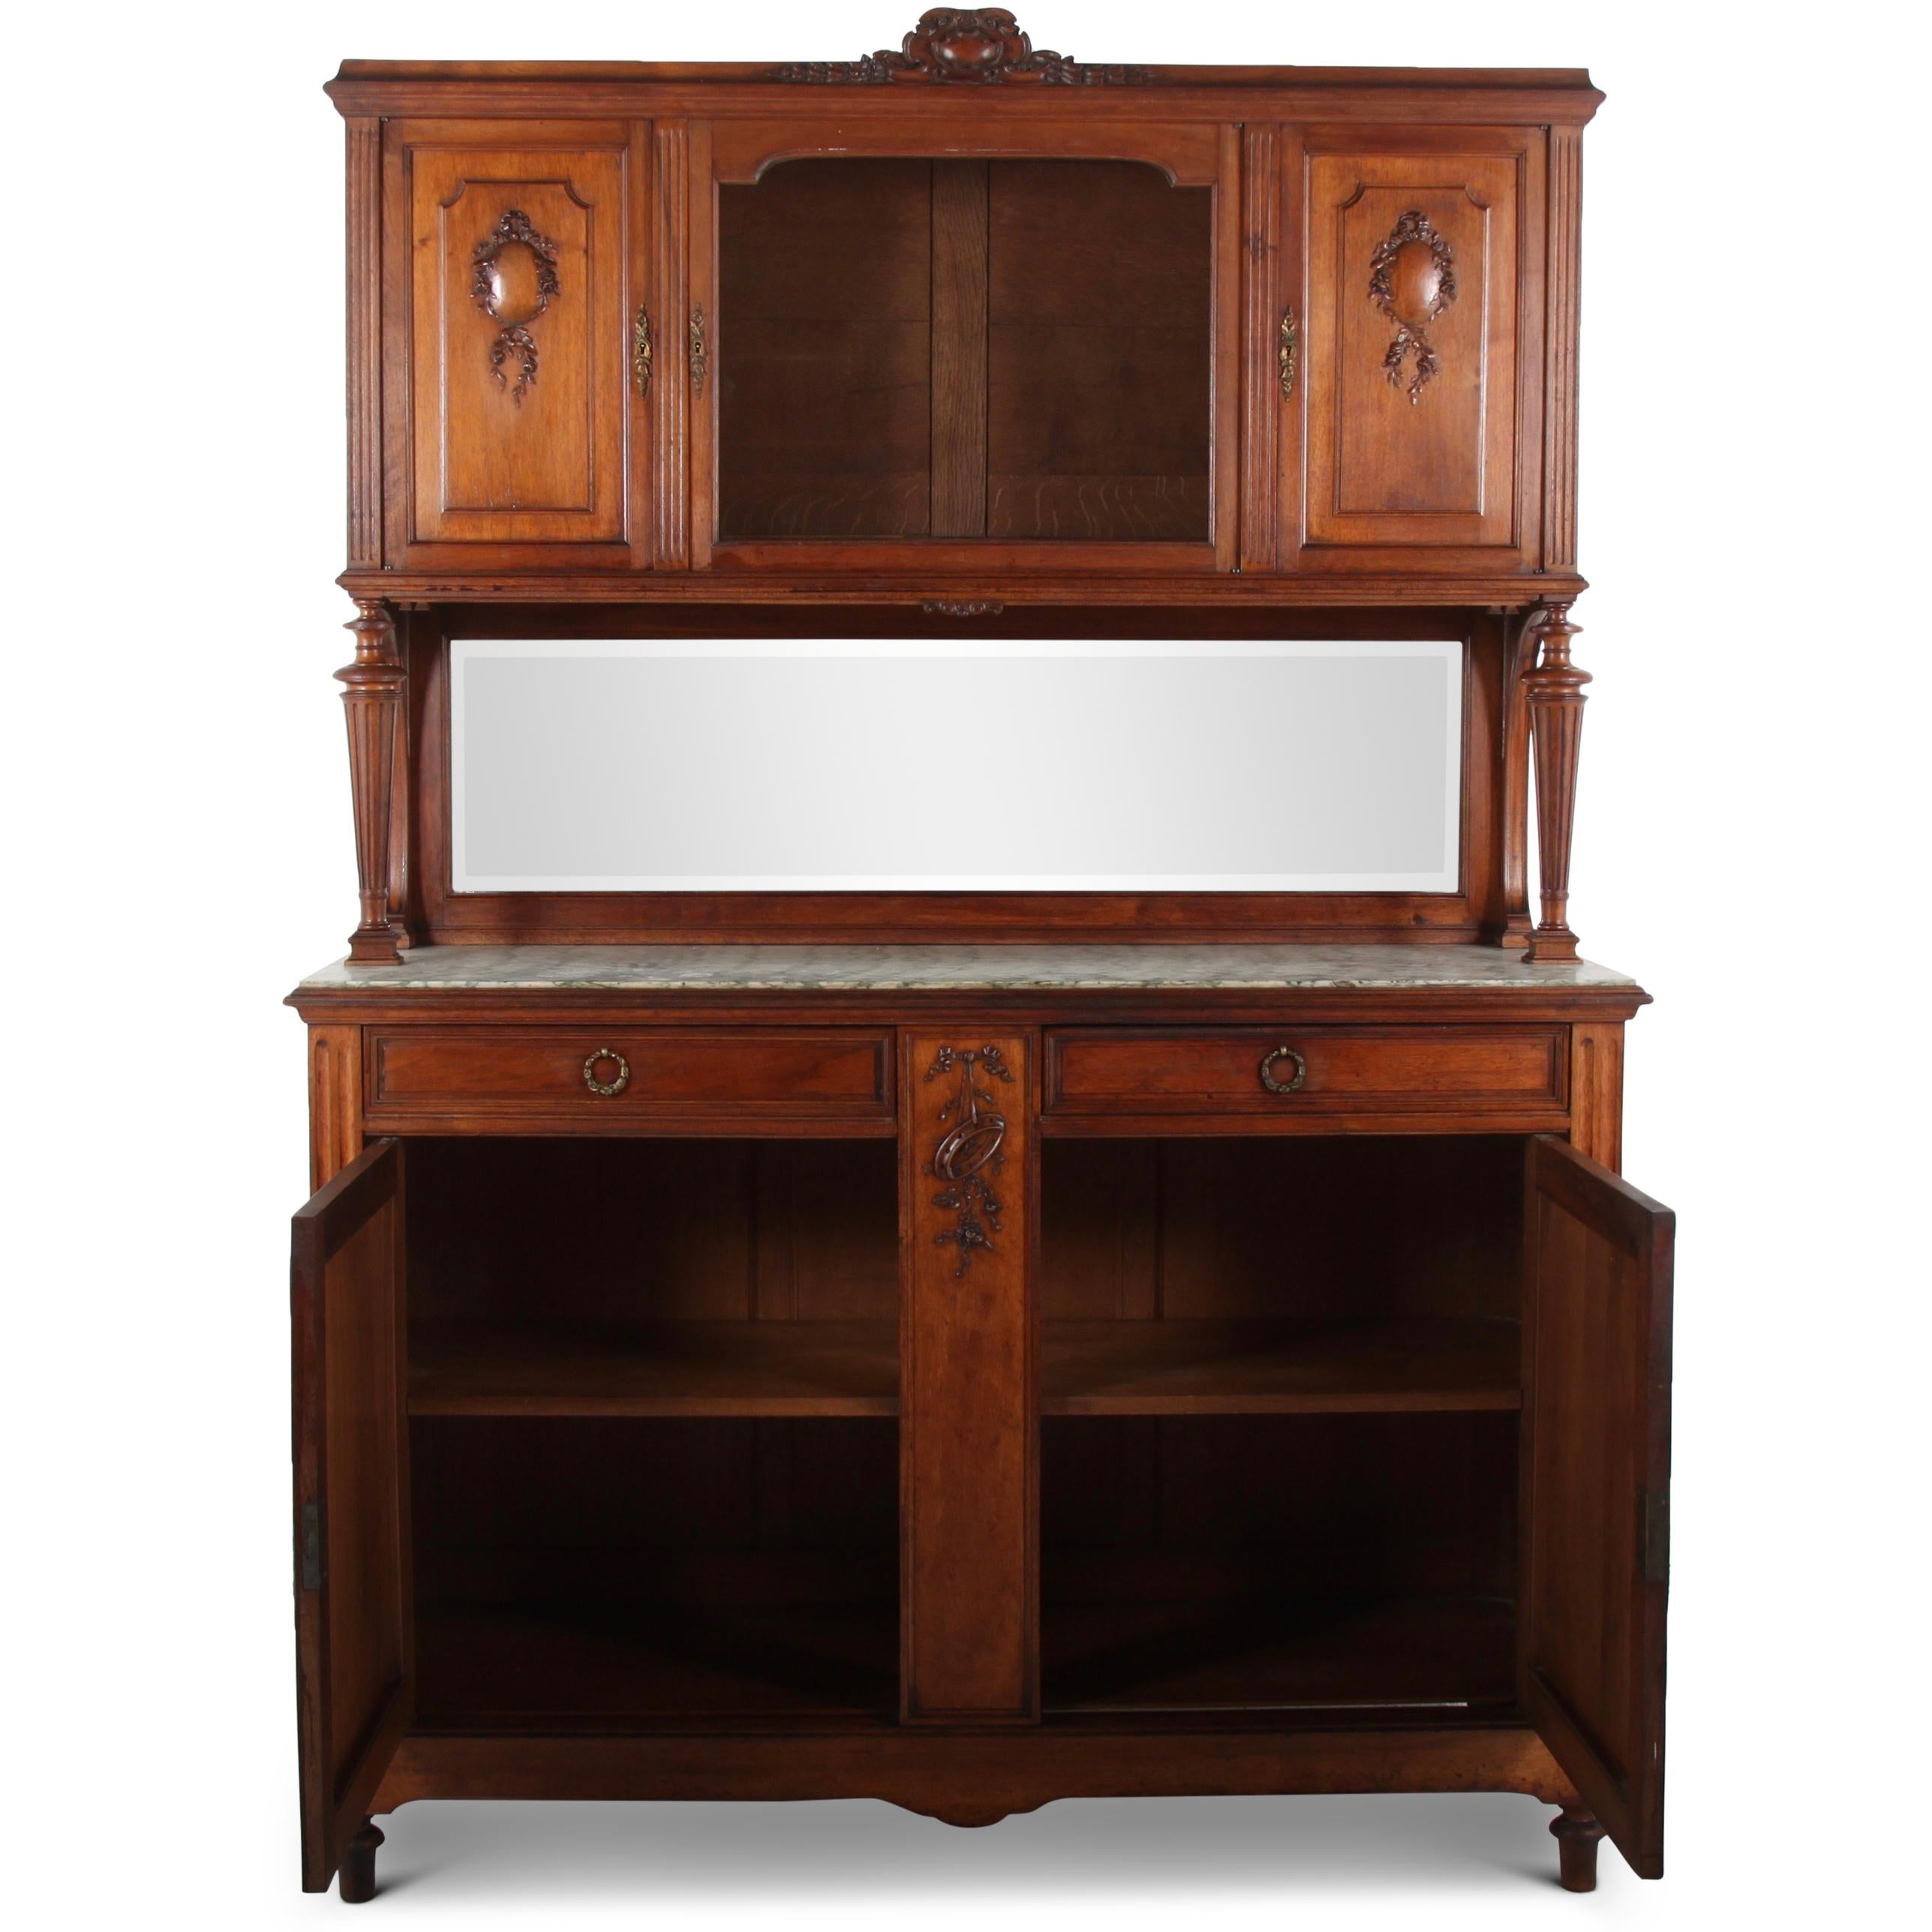 A French carved walnut Louis XVI style buffet Deux Corps, the top with a central glass door flanked by panelled and carved doors and raised on turned fluted columns. The marble-top base has two raised-panelled doors below two drawers and a central